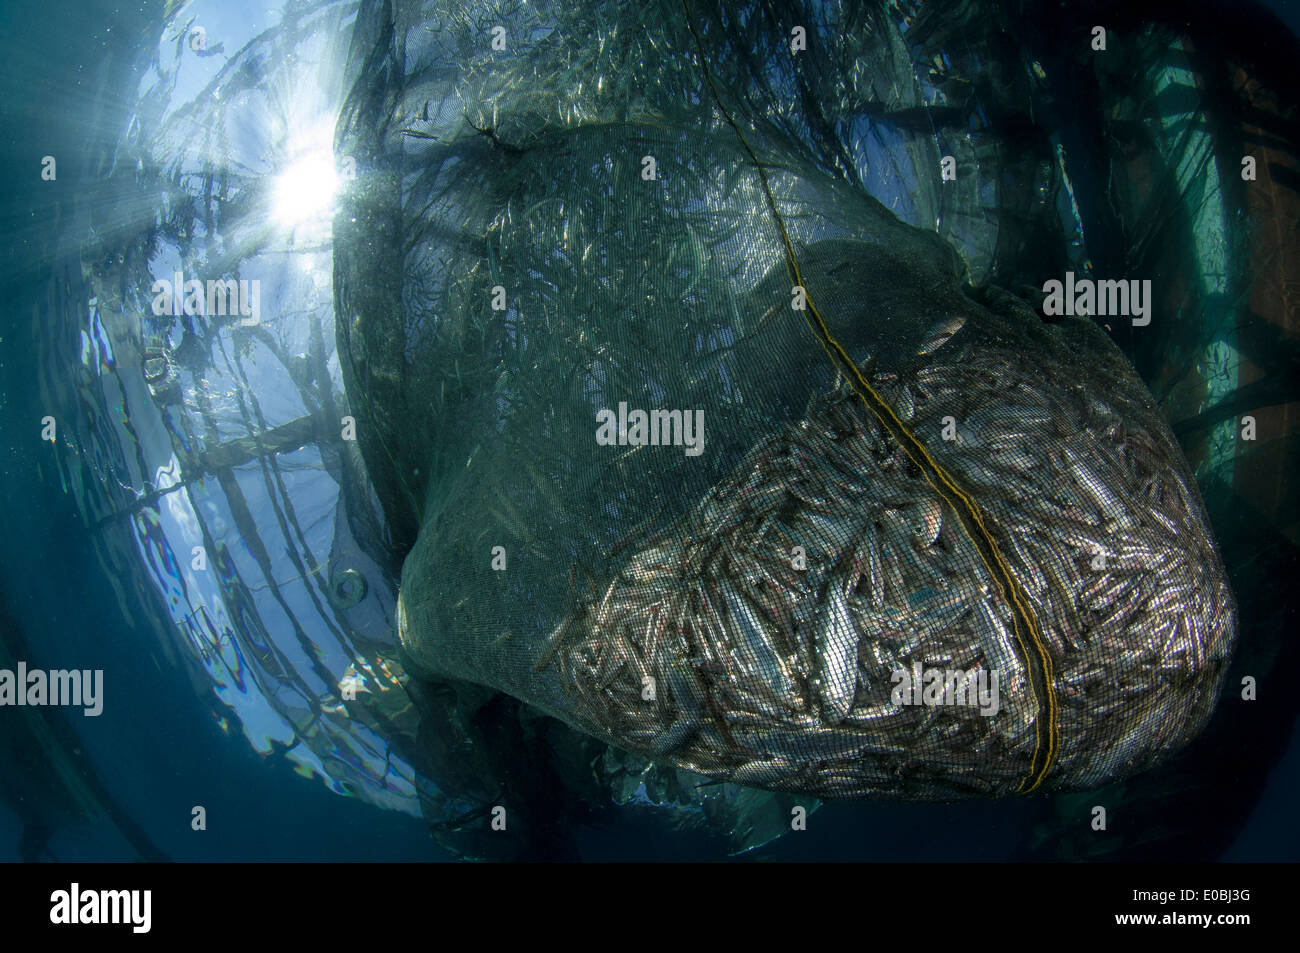 Net filled with small fish, ikan puri, below a Bagan (local fishing boat with platform and nets), Cenderawasih Bay, New Guinea Stock Photo